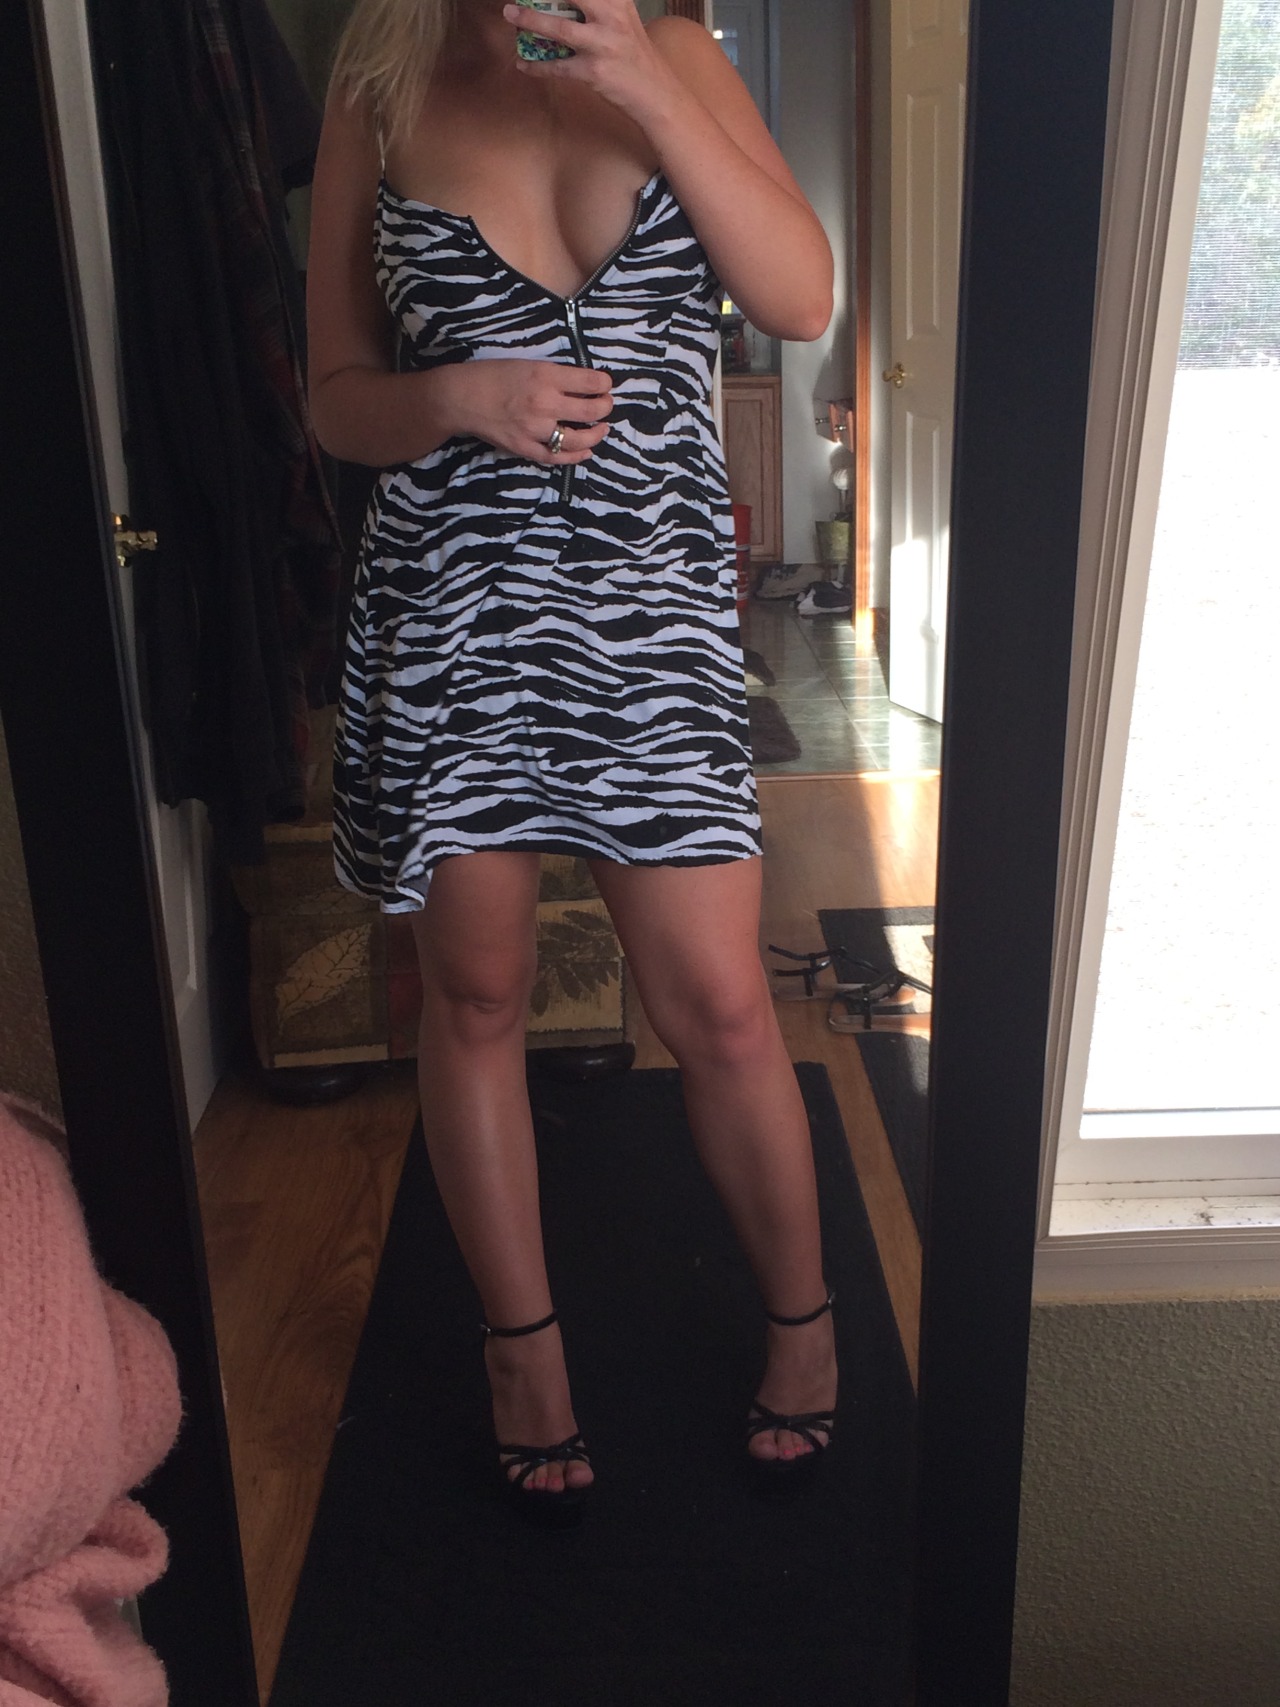 aytro-loves-kasha:  I love wearing dresses with no bra or panties!  perfect